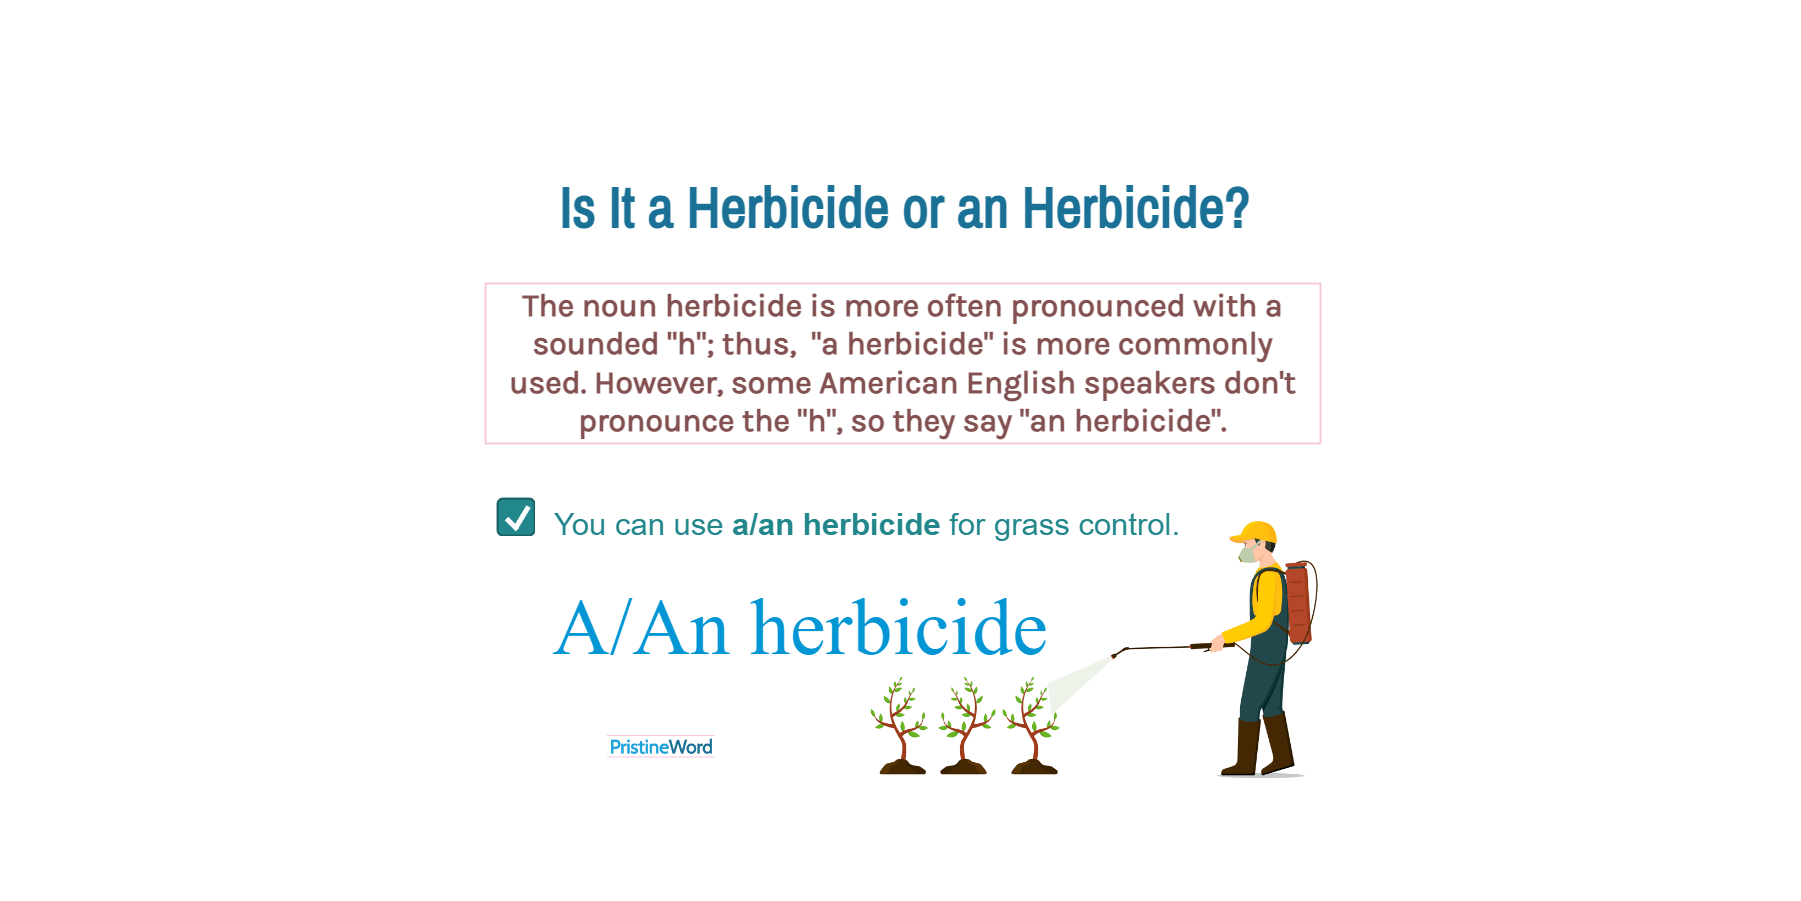 Is It a Herbicide or an Herbicide?